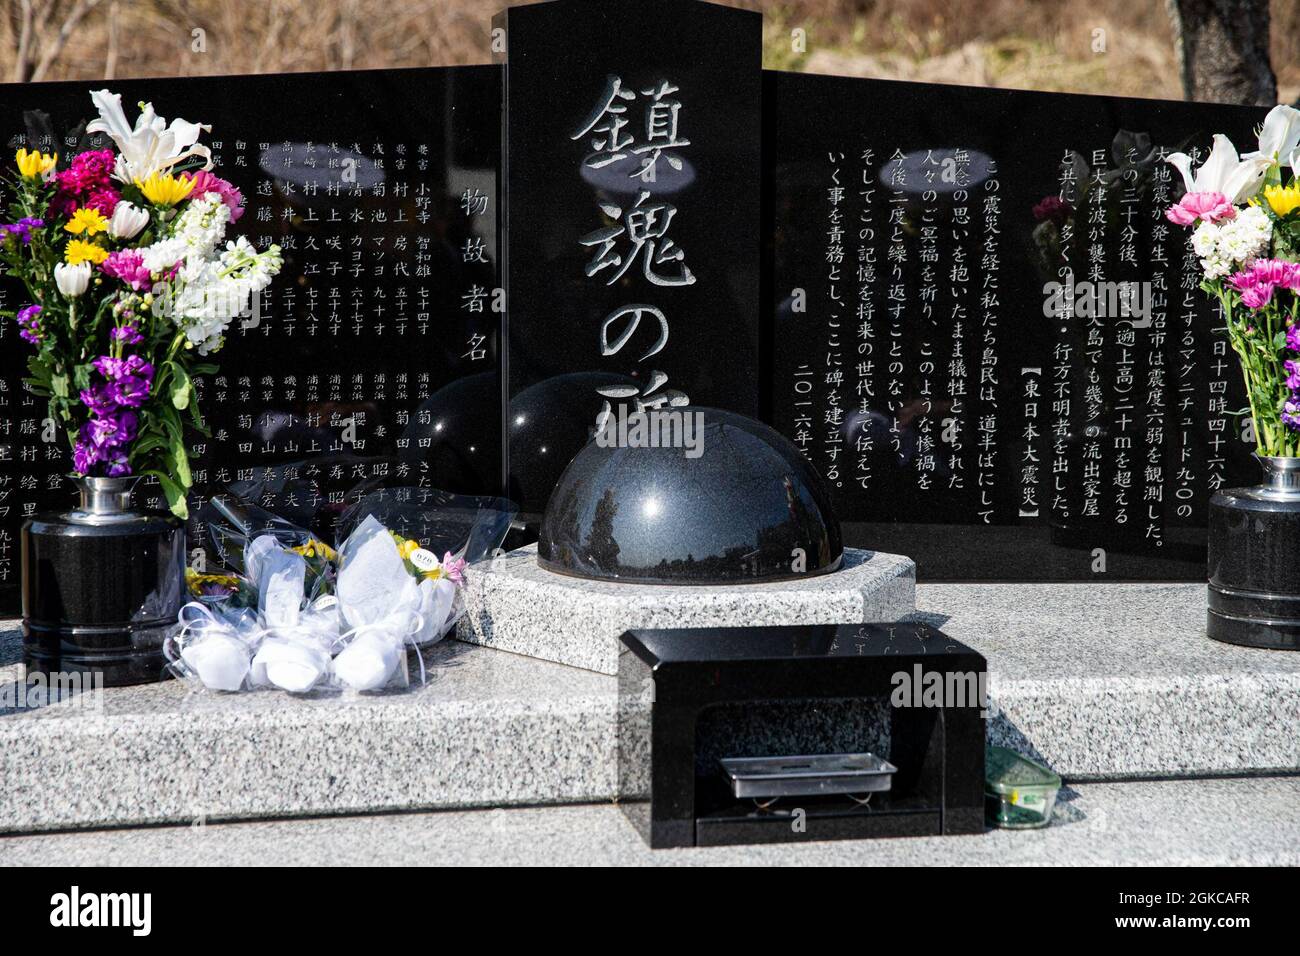 Marine Corps Installations Pacific key leaders gather around a memorial on Oshima Island, Japan, March 11, 2021. The memorial recognizes the 33 people from Oshima Island who lost their lives in the 2011 Great East Japan earthquake and tsunami. Stock Photo